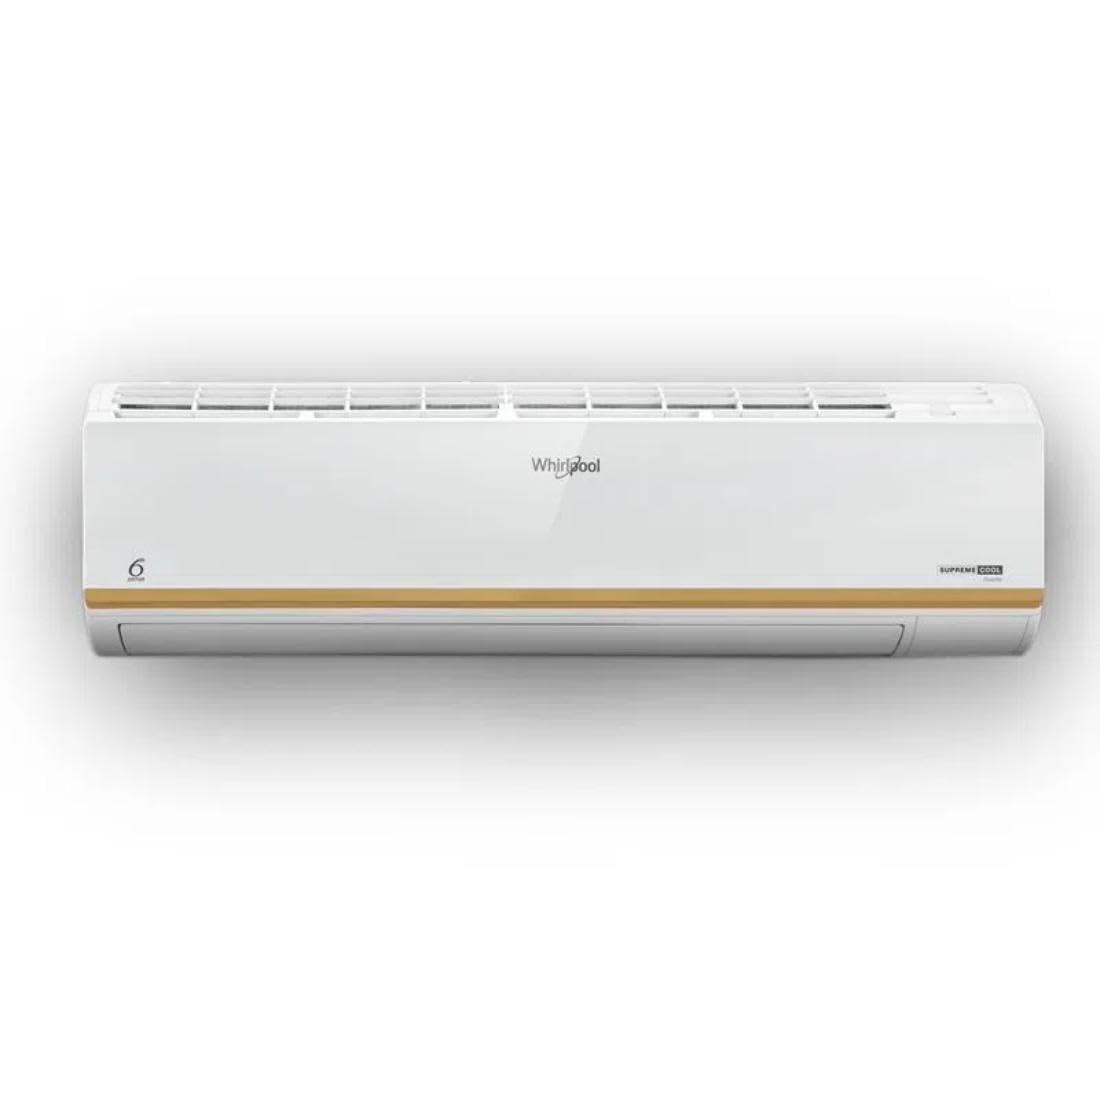 Whirlpool 2 Ton 3 Star Supremecool Inverter Split AC SUPREMECOOL 20T 3S INV EXP S4I3AD0 Copper Convertible 4-in-1 Cooling Mode HD Filter 2024 Model White